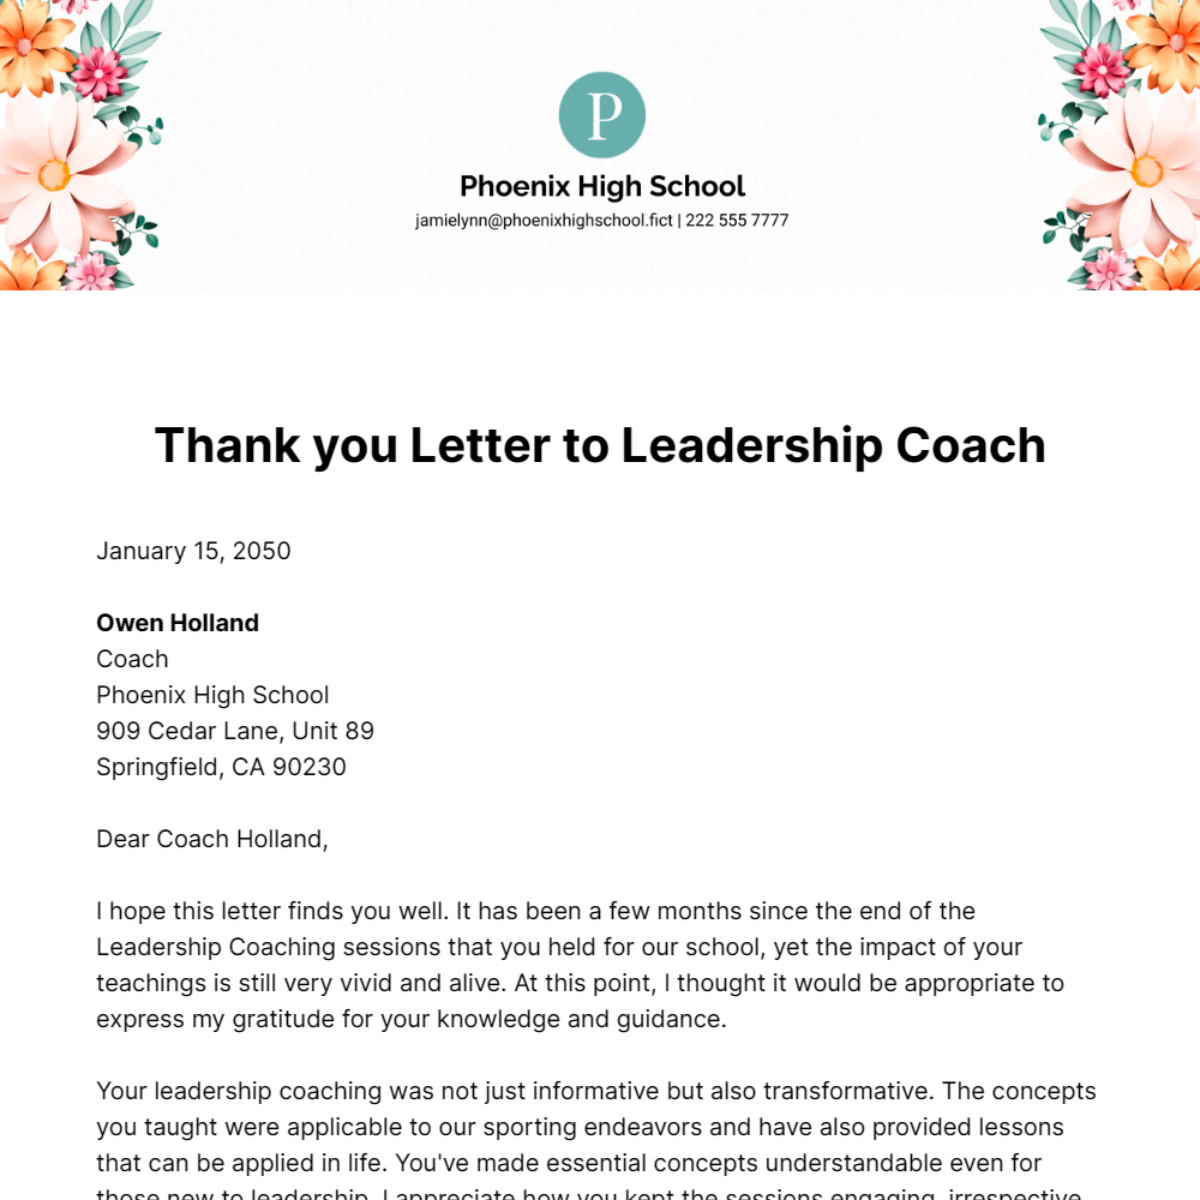 Thank you Letter to Leadership Coach Template